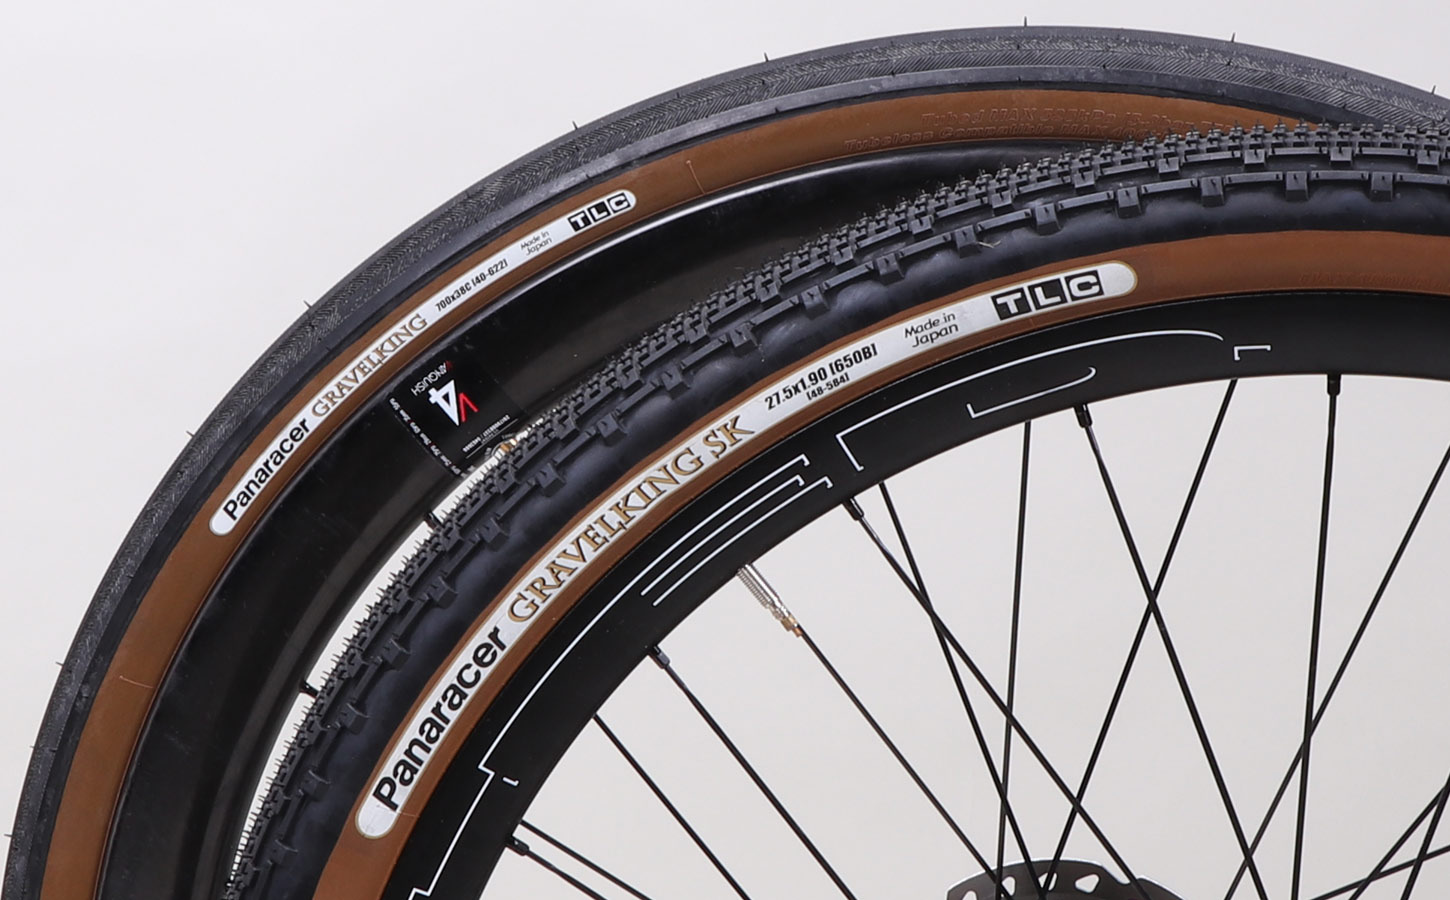 All T-5 All-Road/All-Race frames accommodate both 650b and 700c tires.